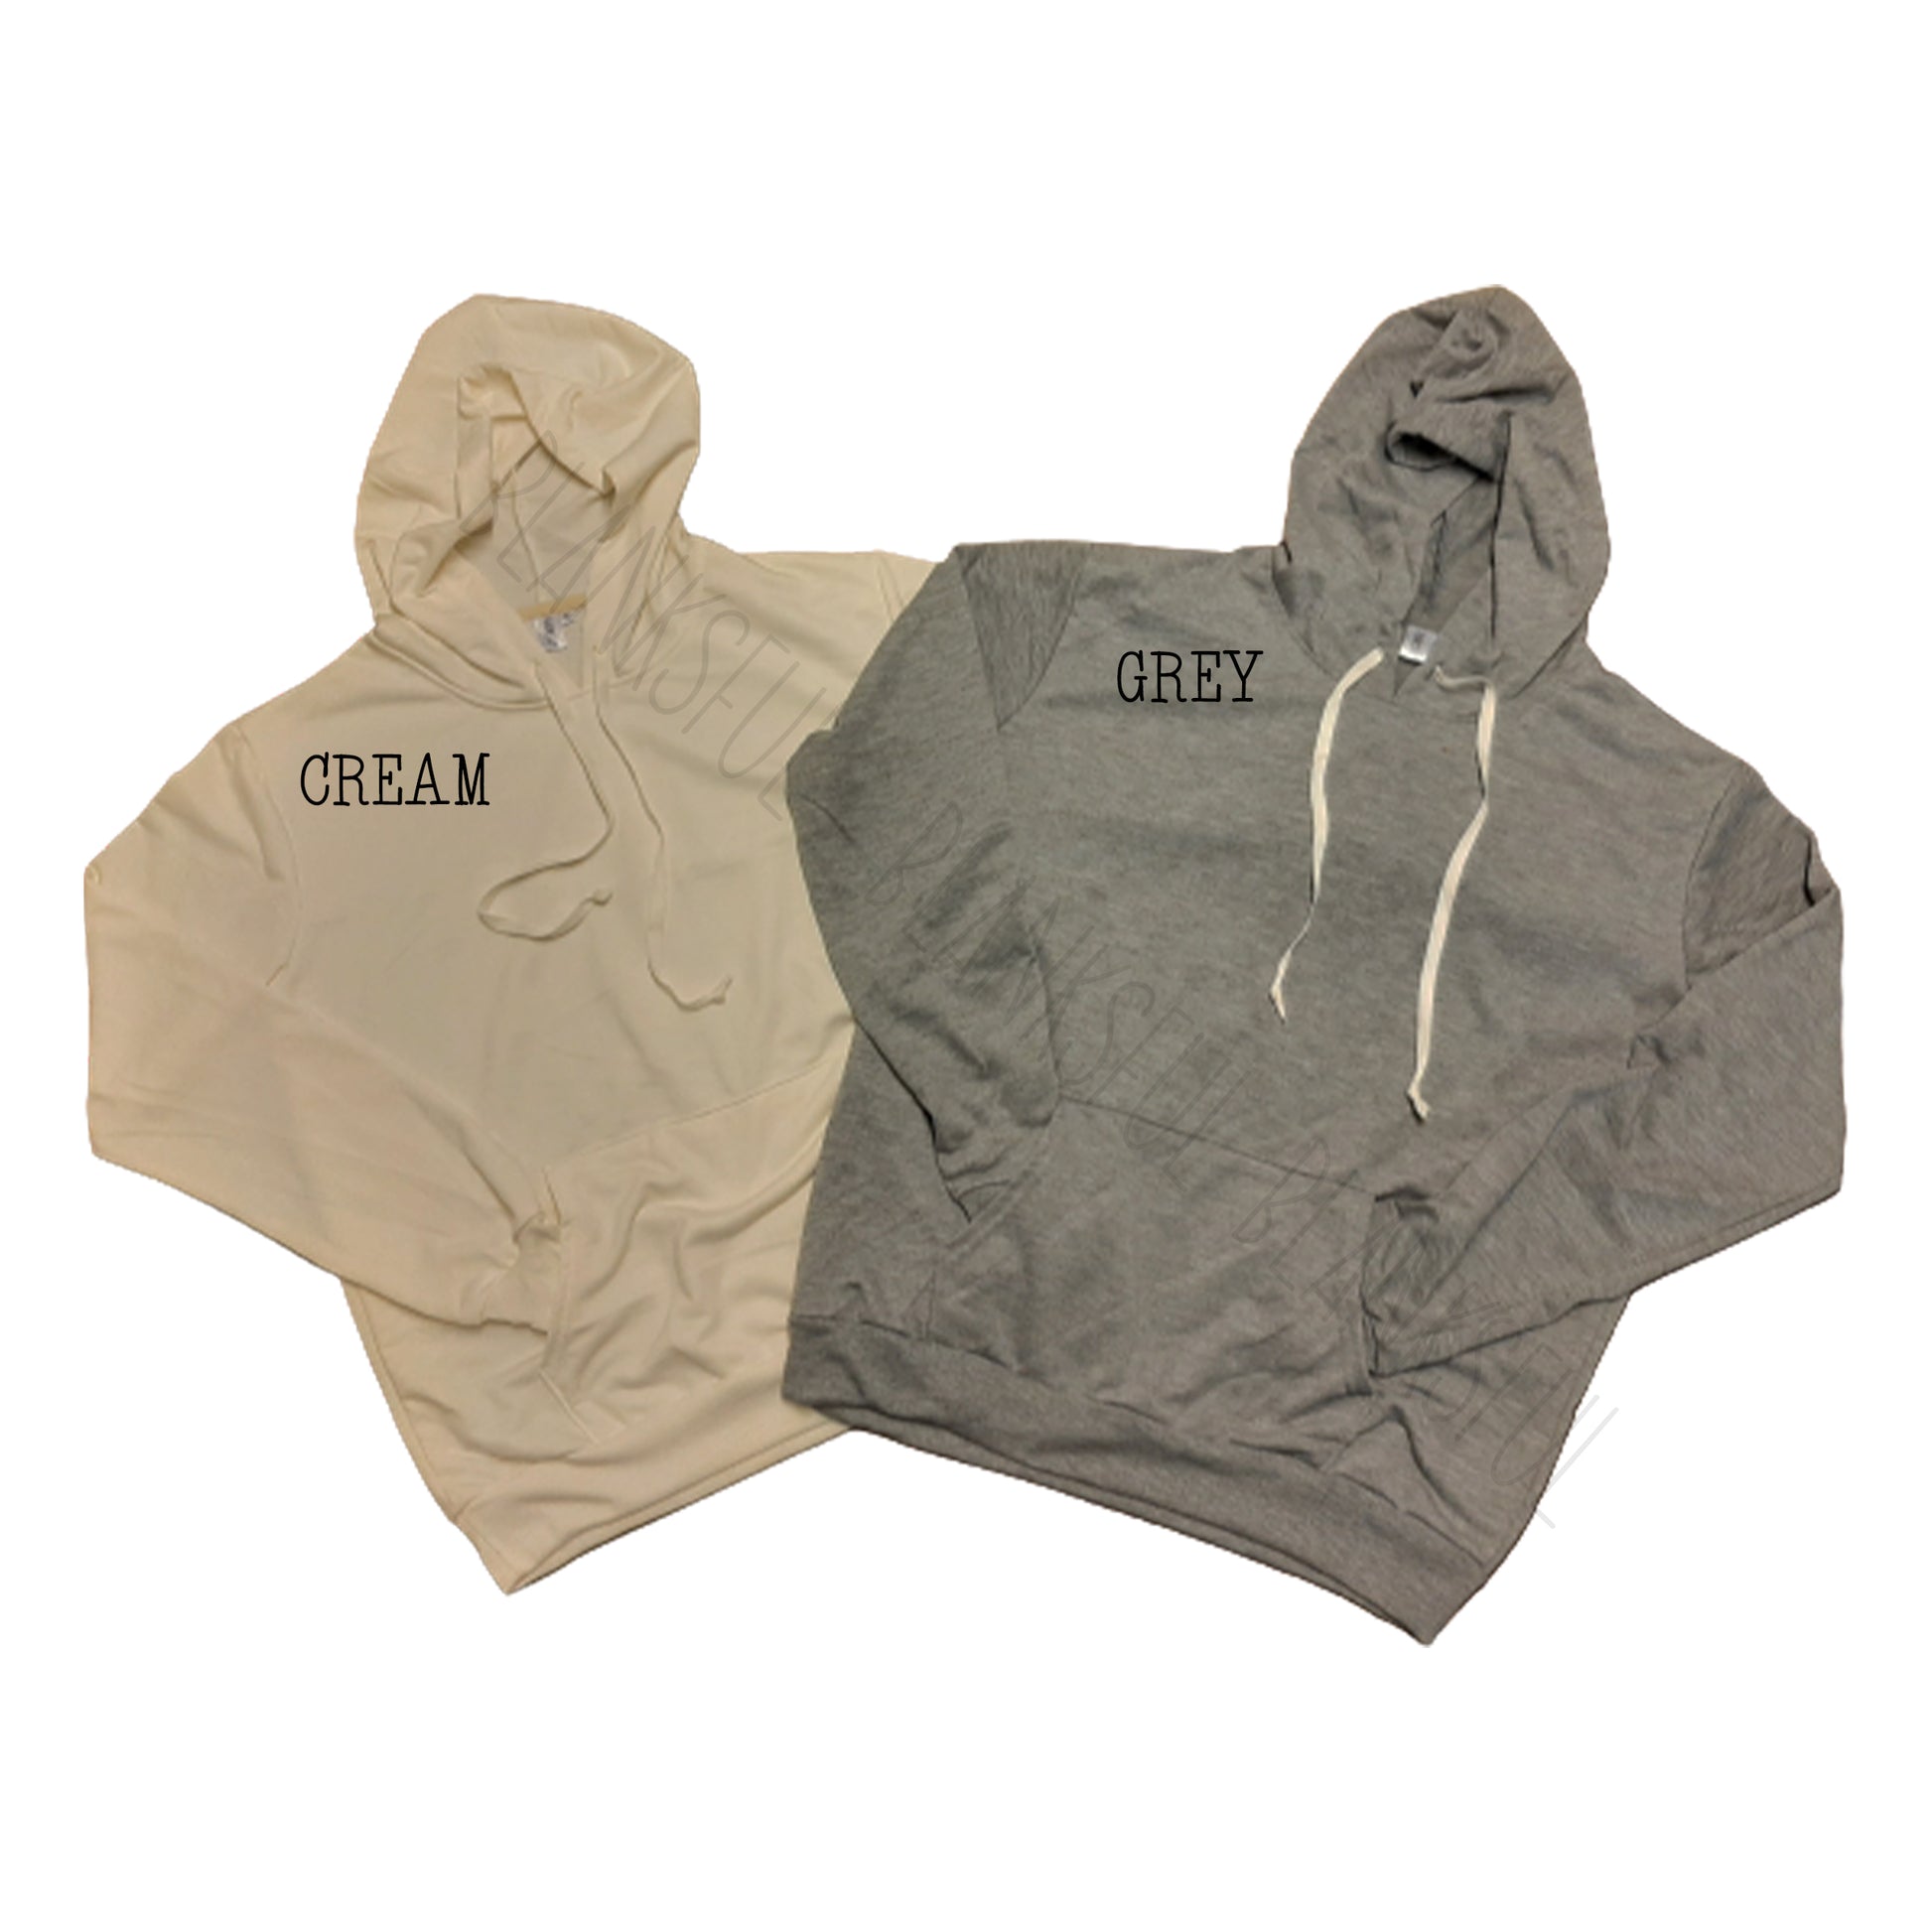 Light Grey Hoodie 100% Polyester sublimation print